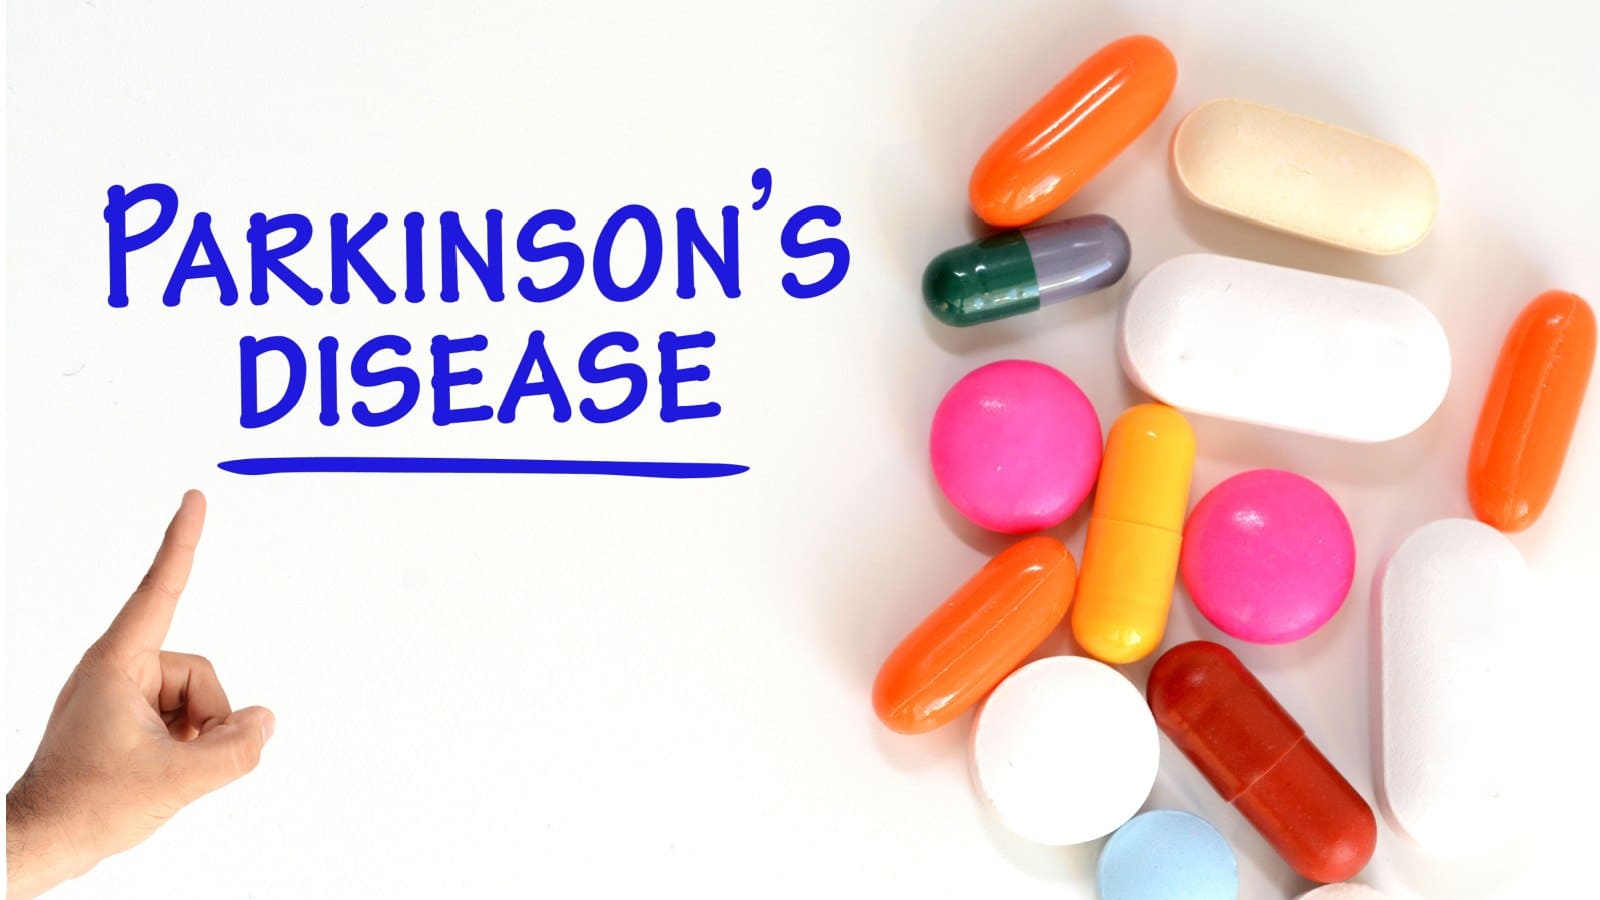 Different medications with a Parkinson’s disease text on white background